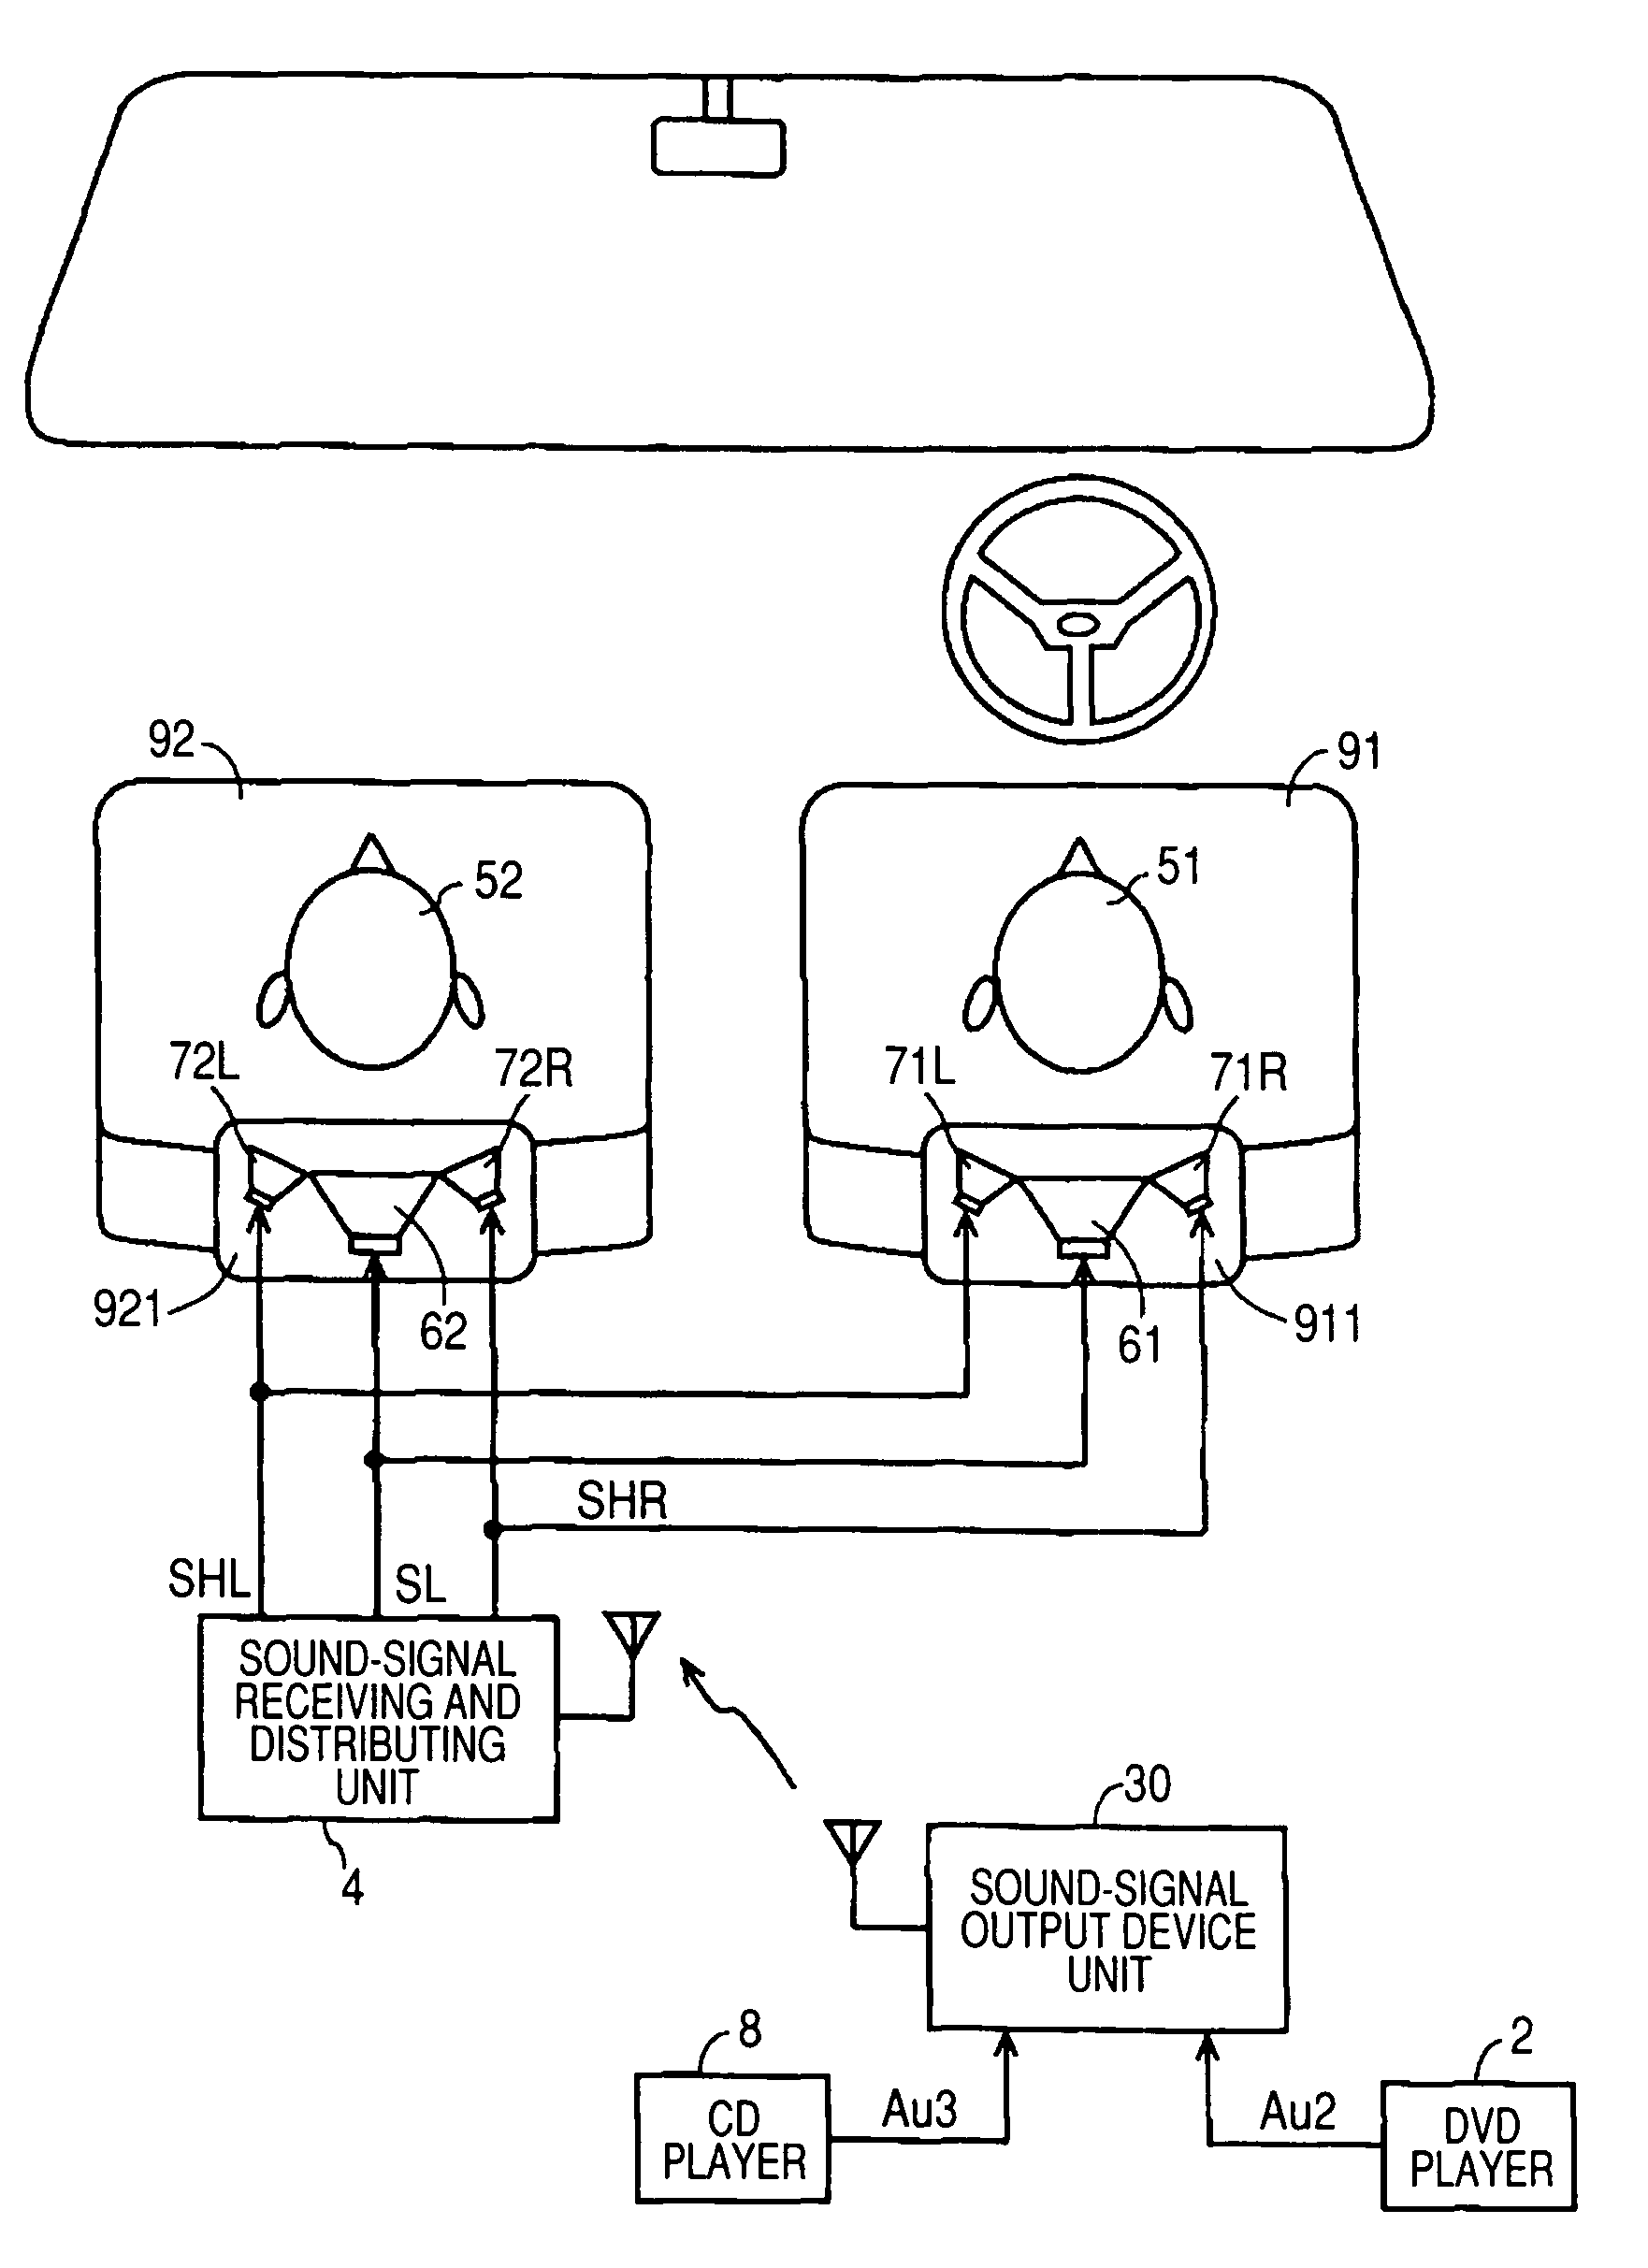 Audio reproduction system and speaker apparatus